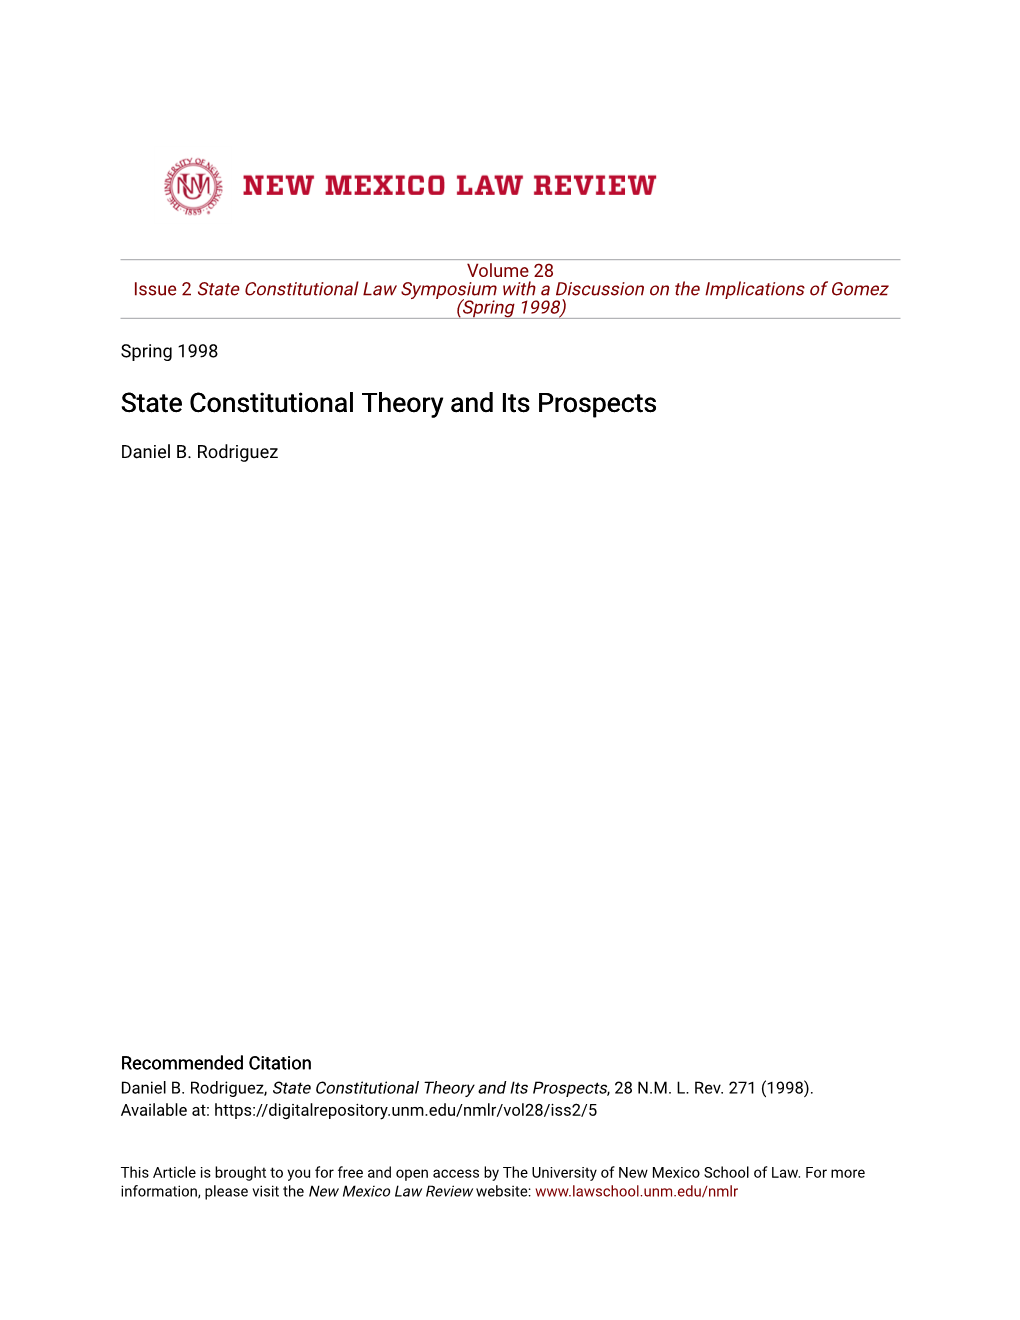 State Constitutional Theory and Its Prospects